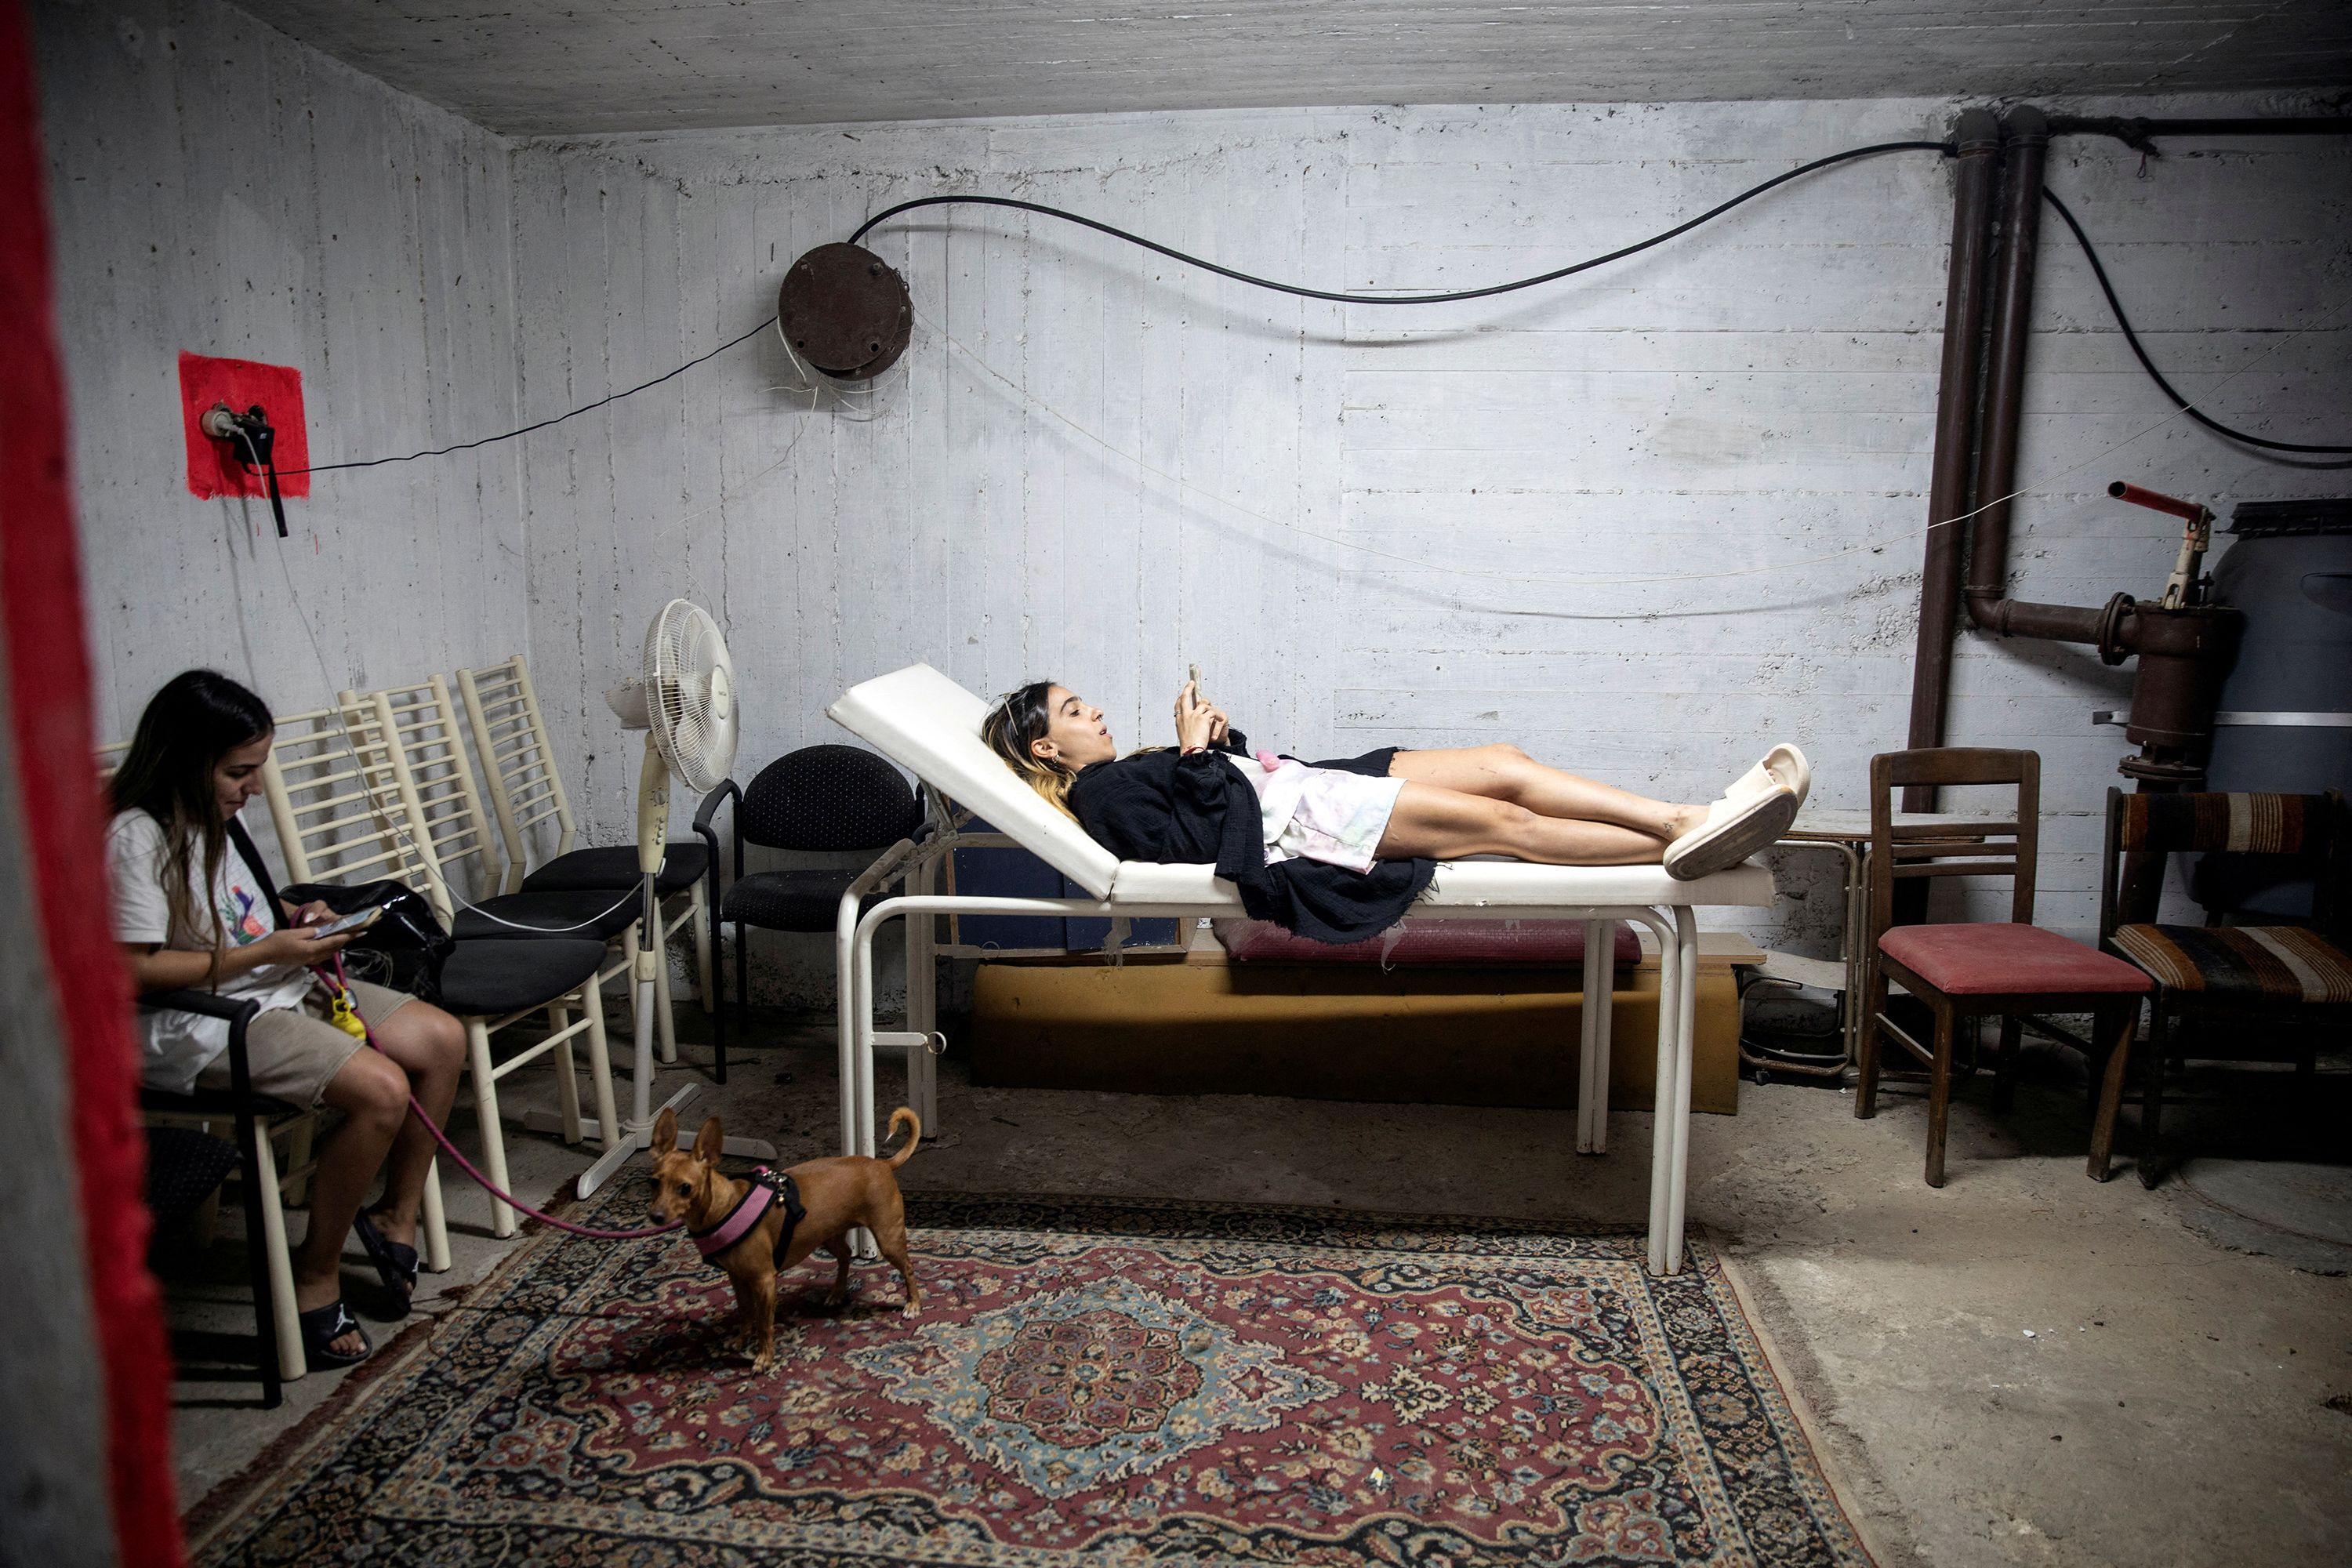 People take cover in a bomb shelter in Rishon Lezion, Israel, as rockets are launched from Gaza on October 7.